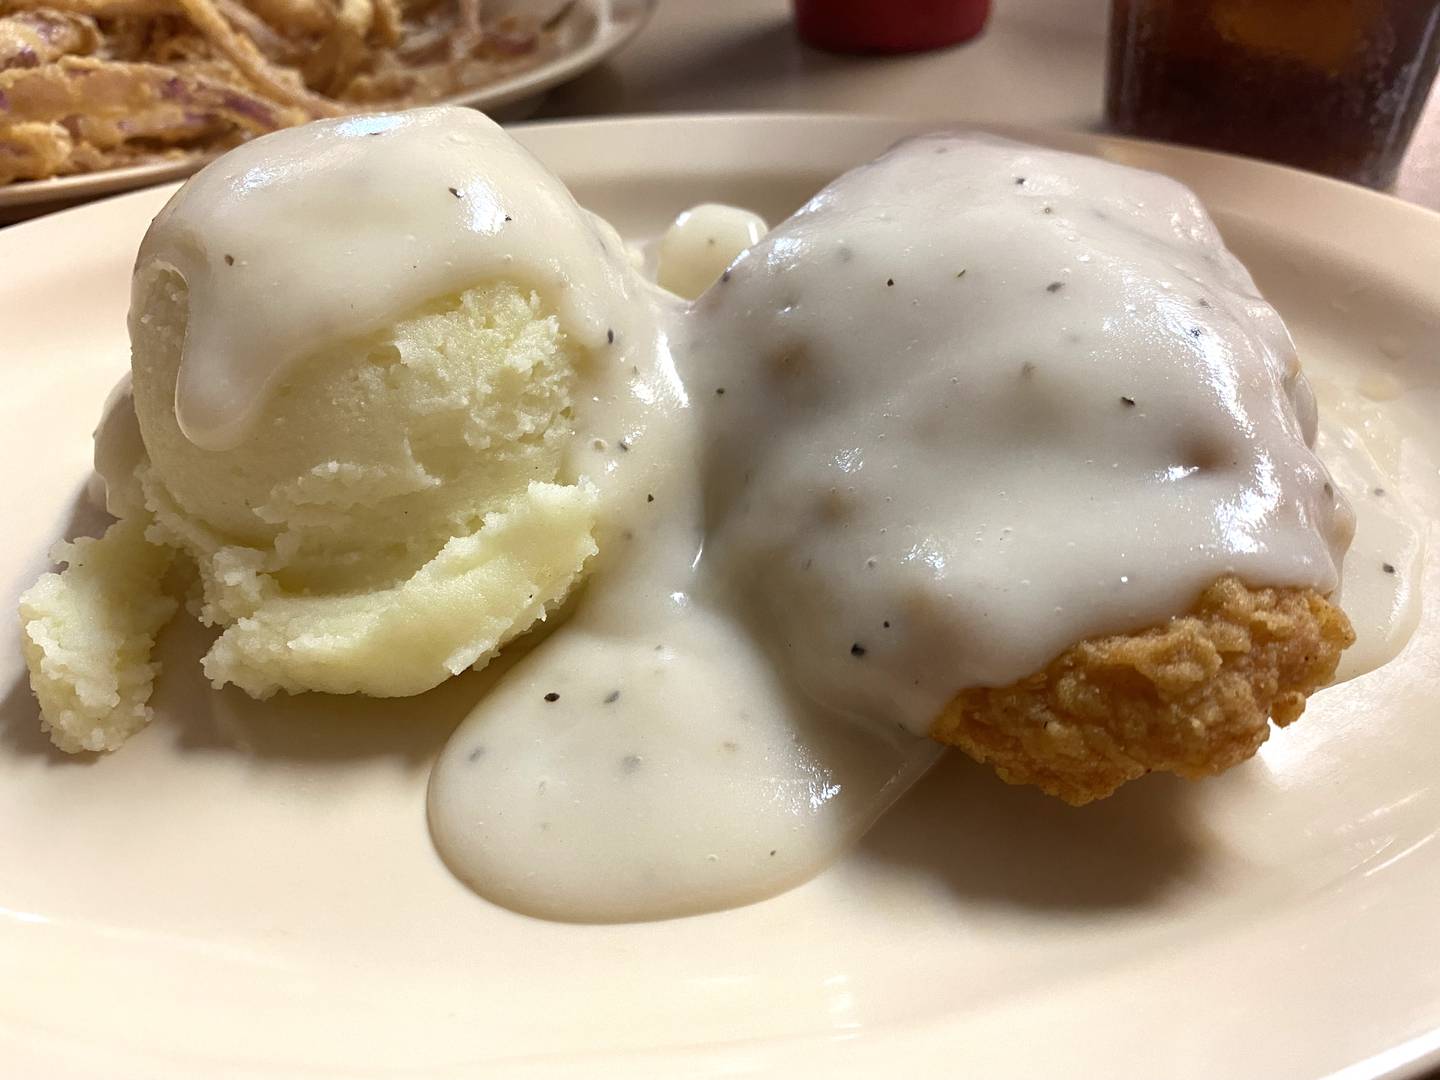 The country-fried chicken breast smothered in gravy is juicy and, like many of the meals at Victoria's Country Diner, hearty.